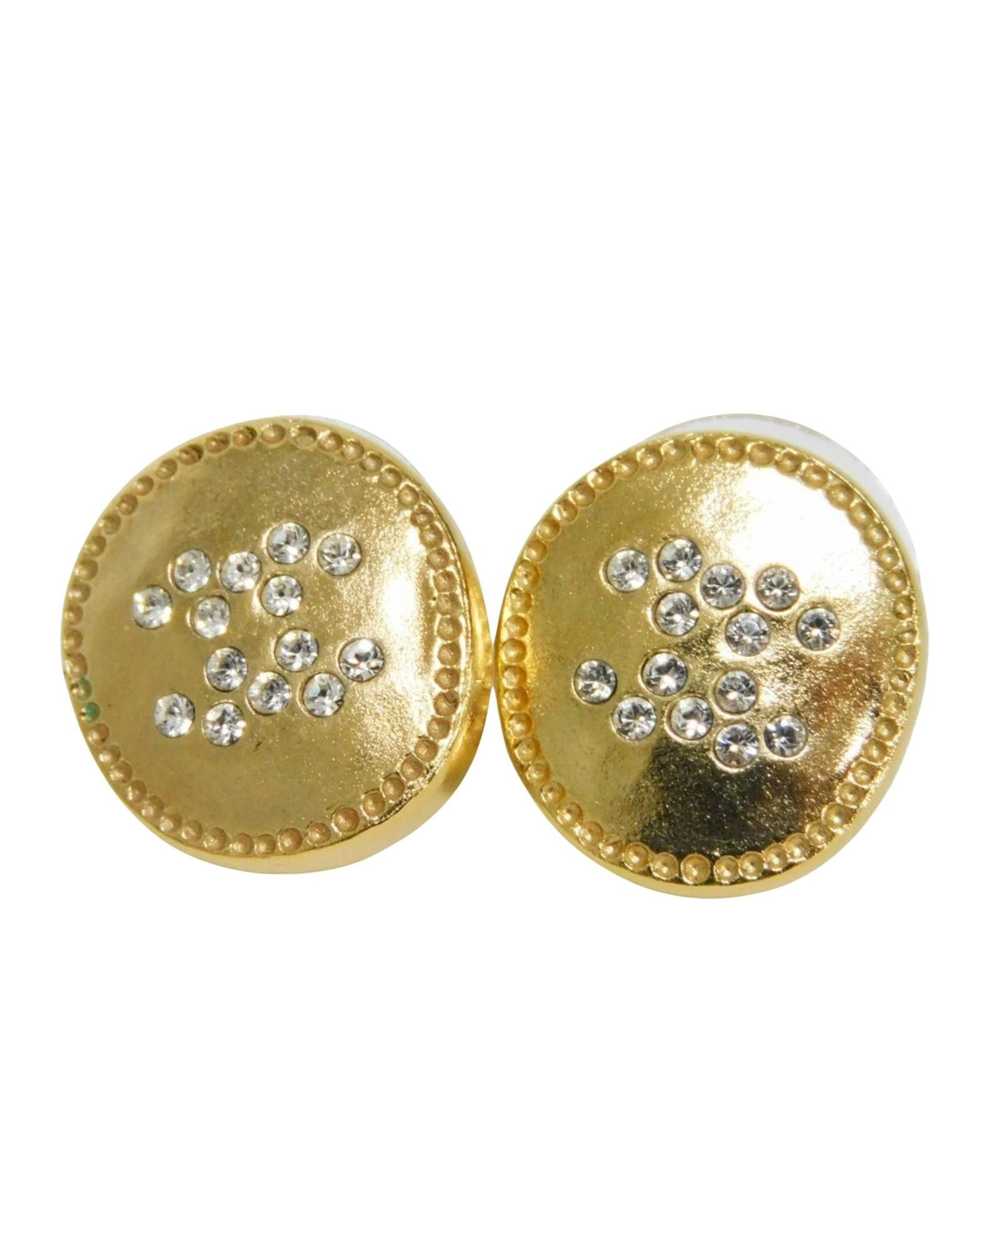 Chanel Champagne Gold Coco Button Earrings - image 1